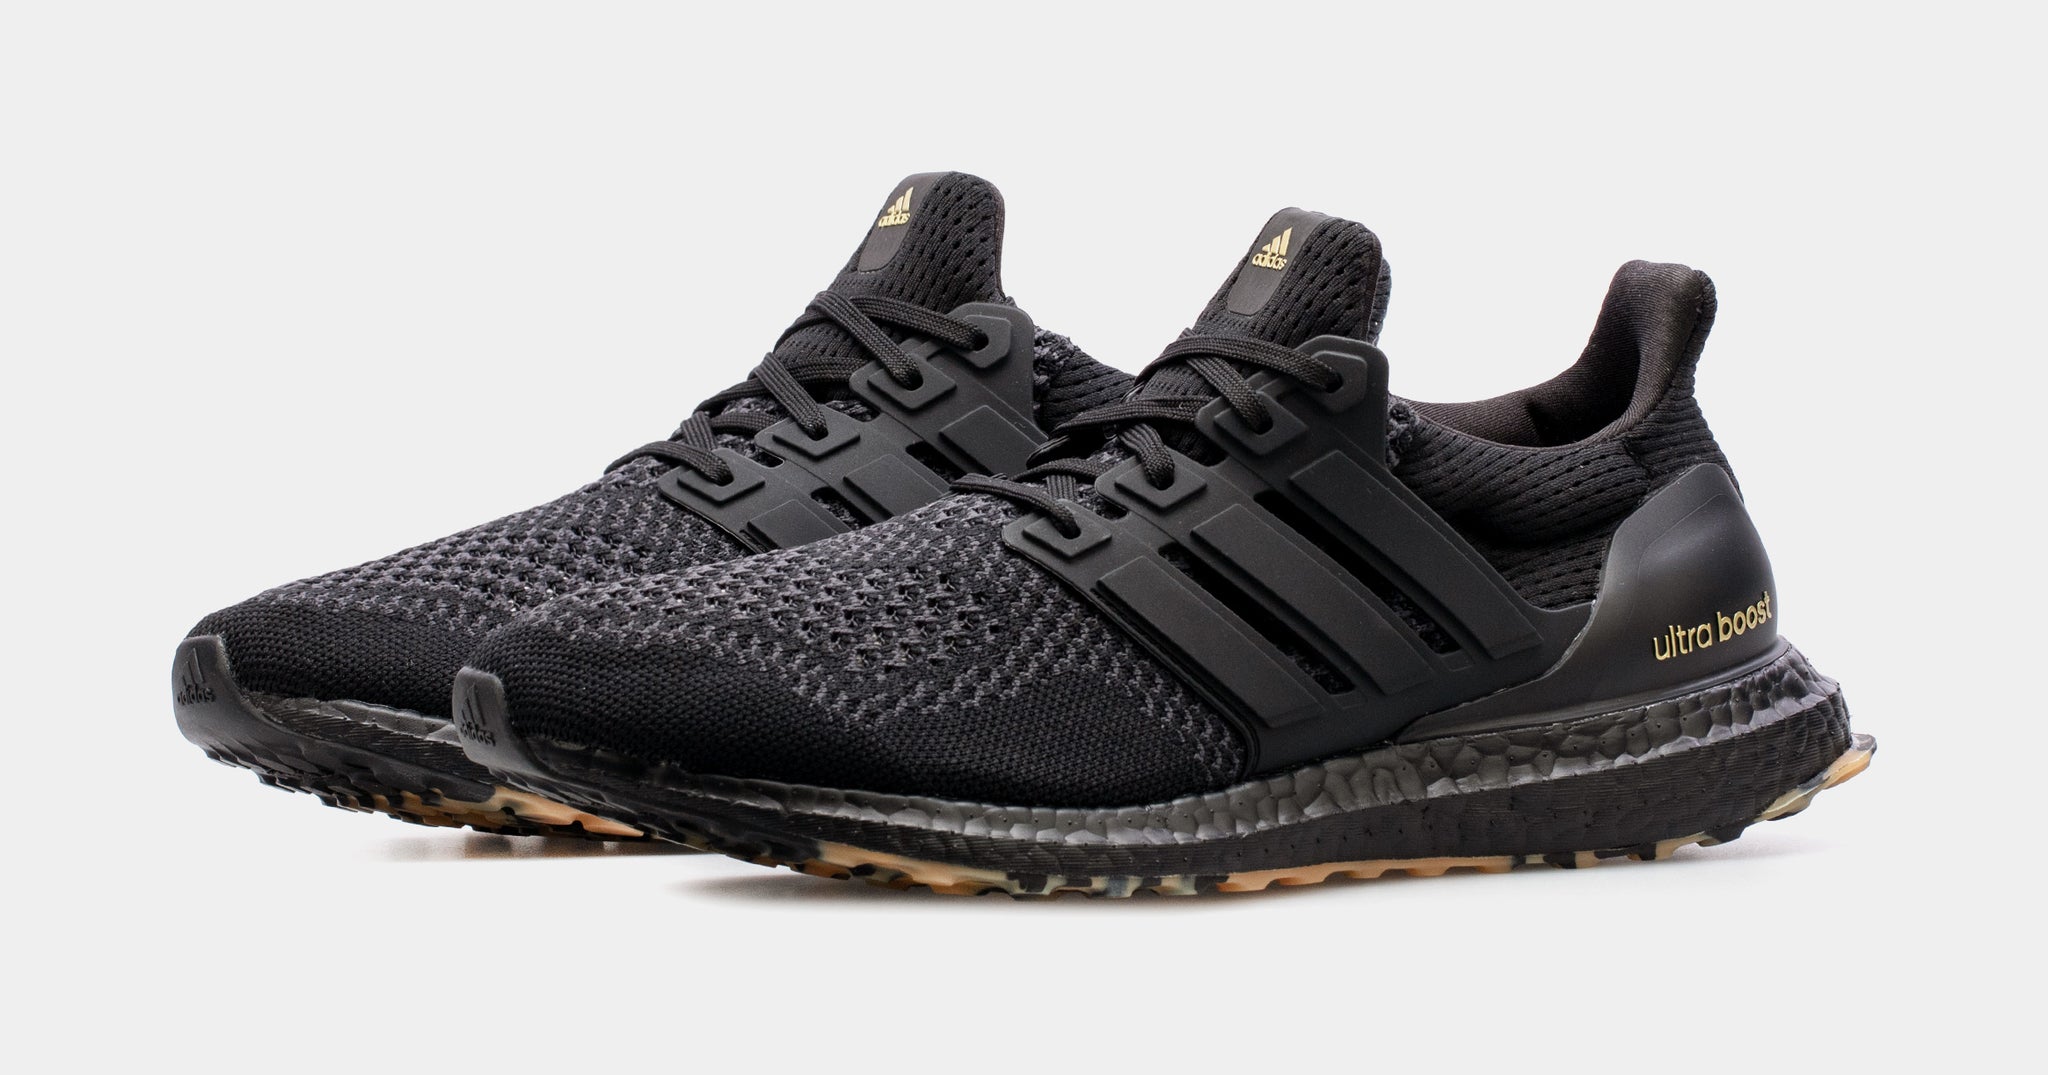 adidas Ultraboost 1.0 Mens Shoes Black GY9136 – Shoe Palace